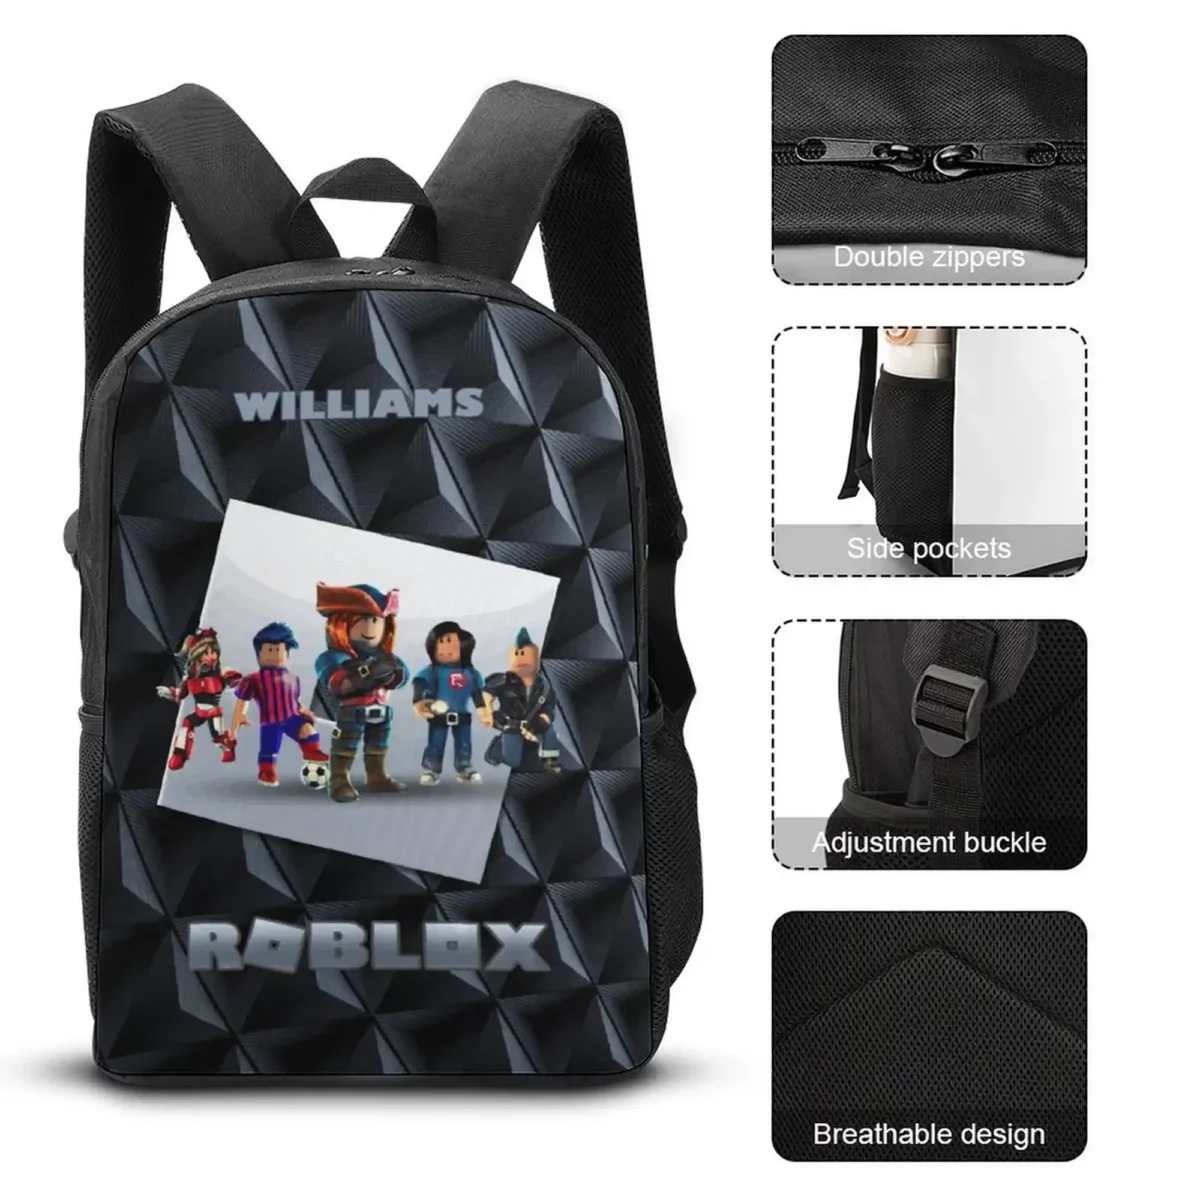 Personalized Black Roblox Backpack – Customizable Gift for Kids Cool Kiddo 22